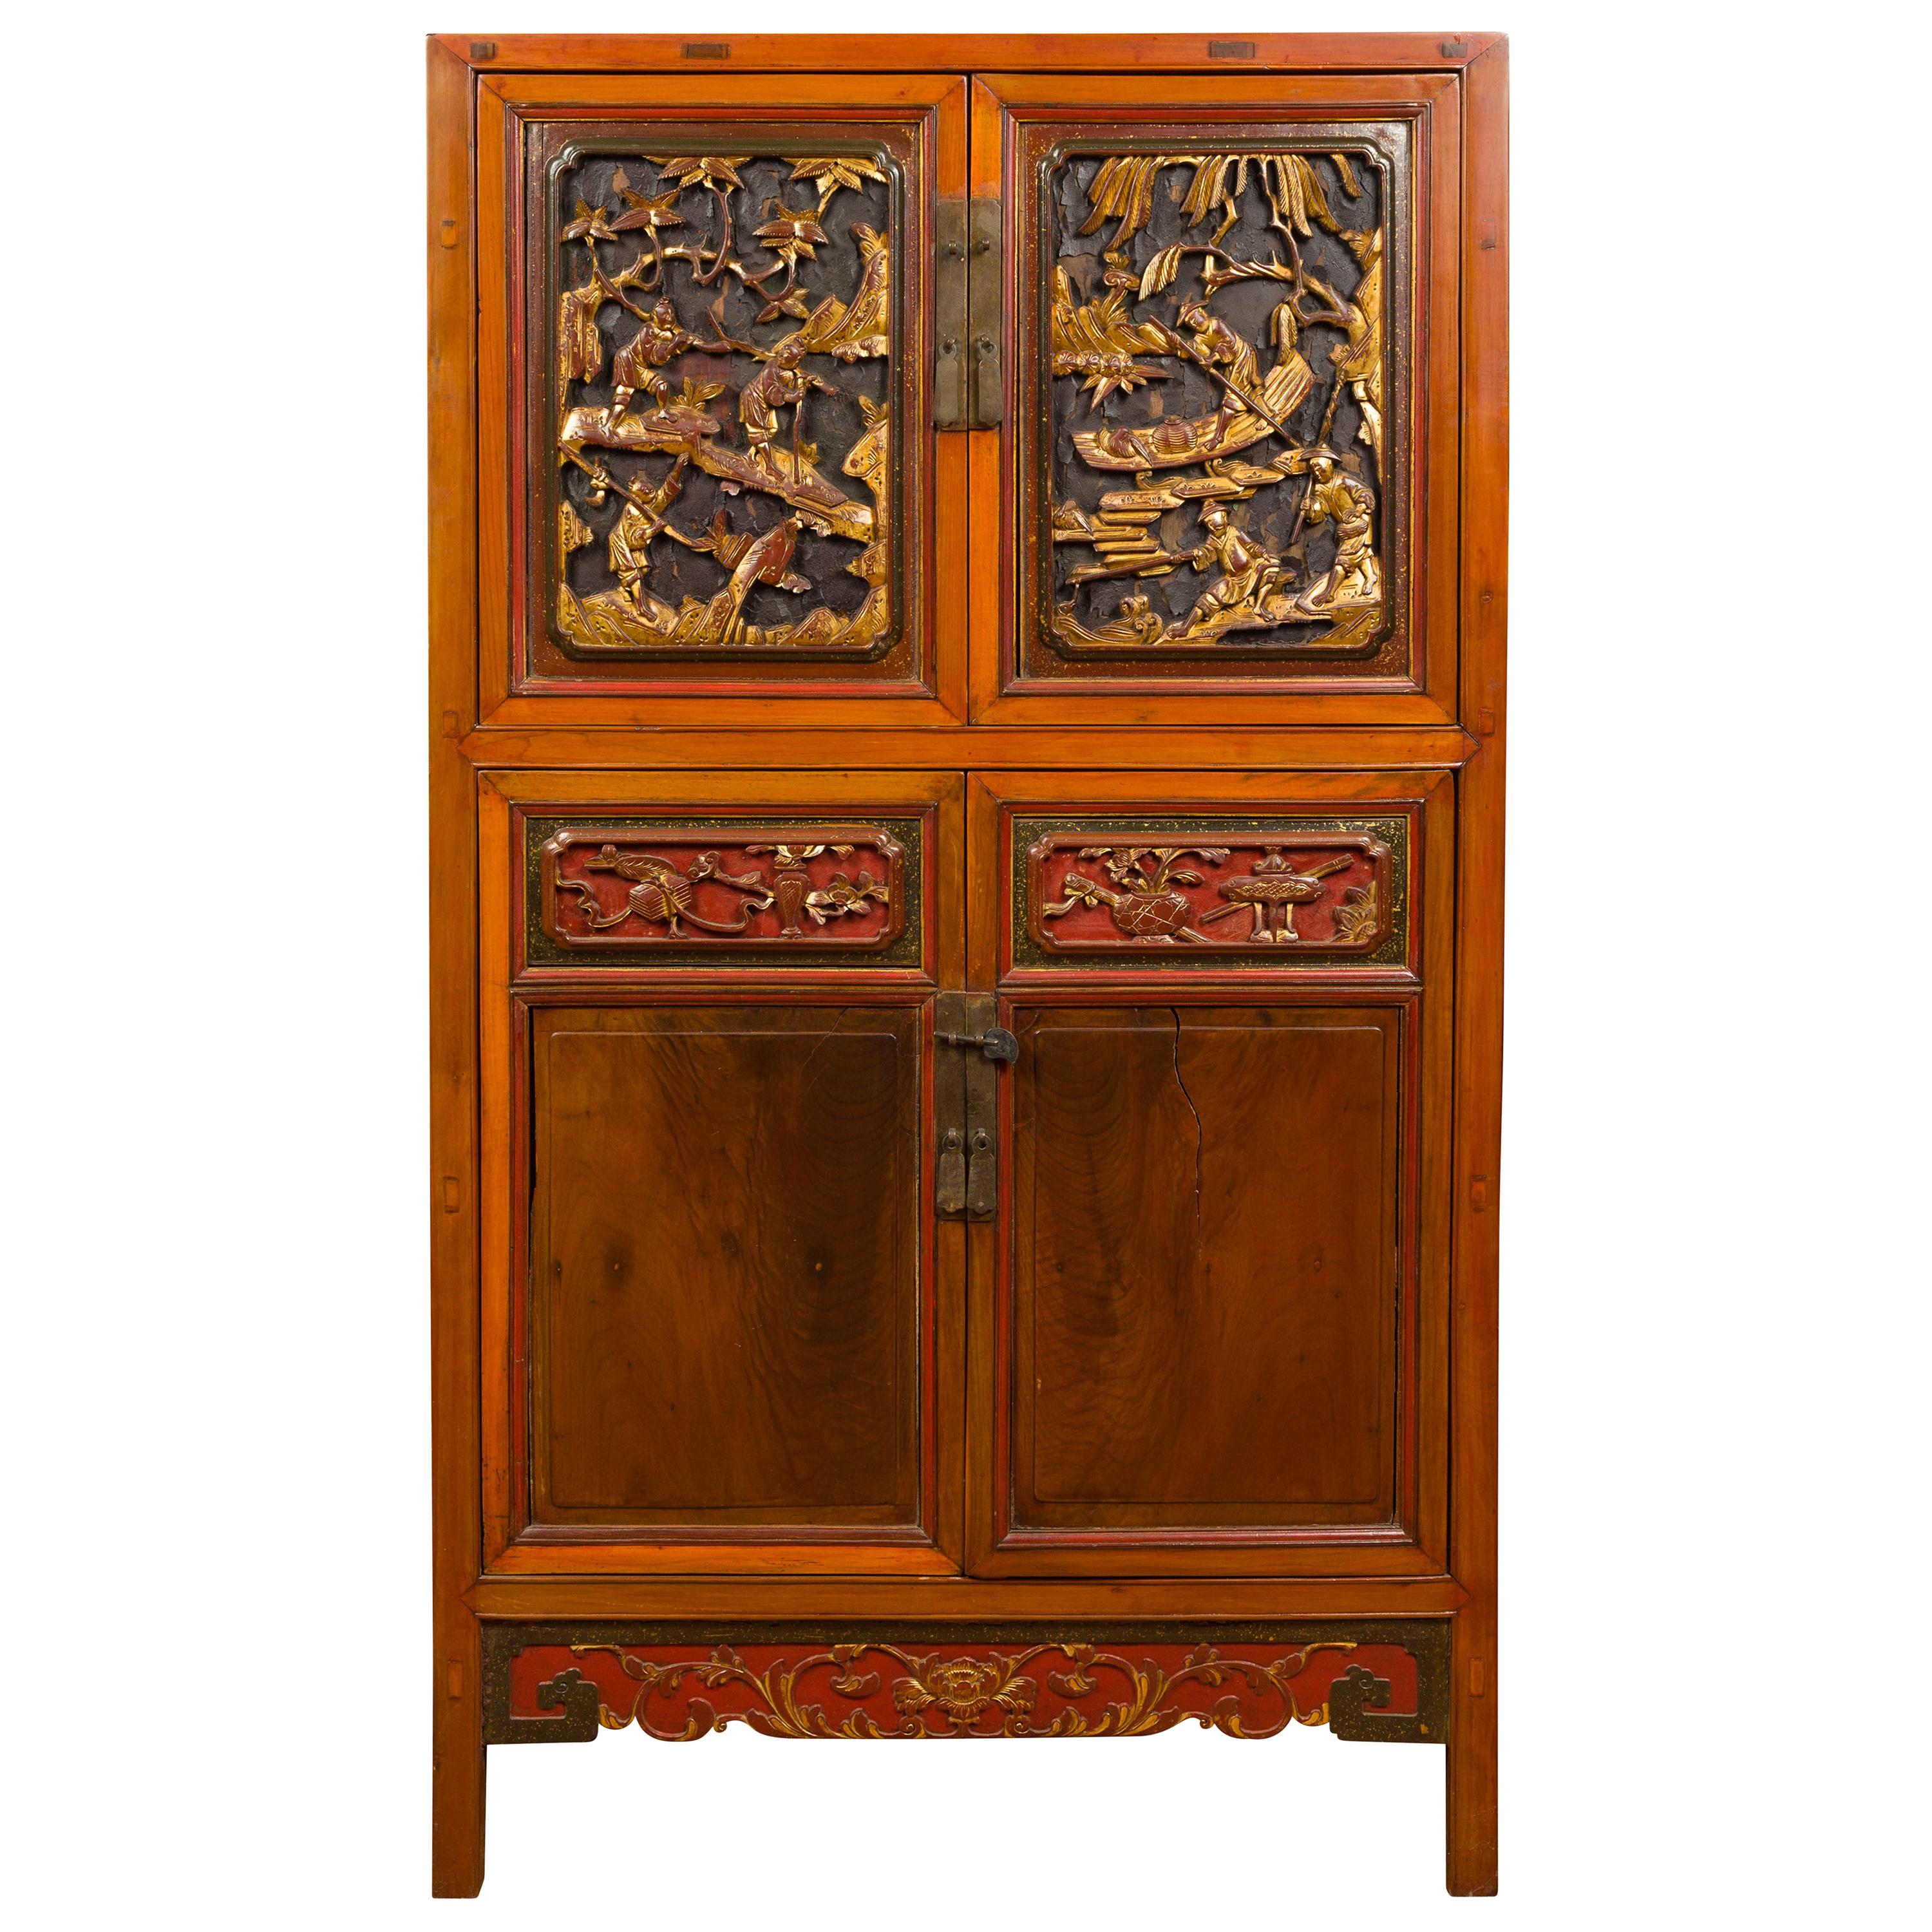 Chinese Ming Dynasty Style Cabinet with Doors, Drawers and Gilt Carved Motifs